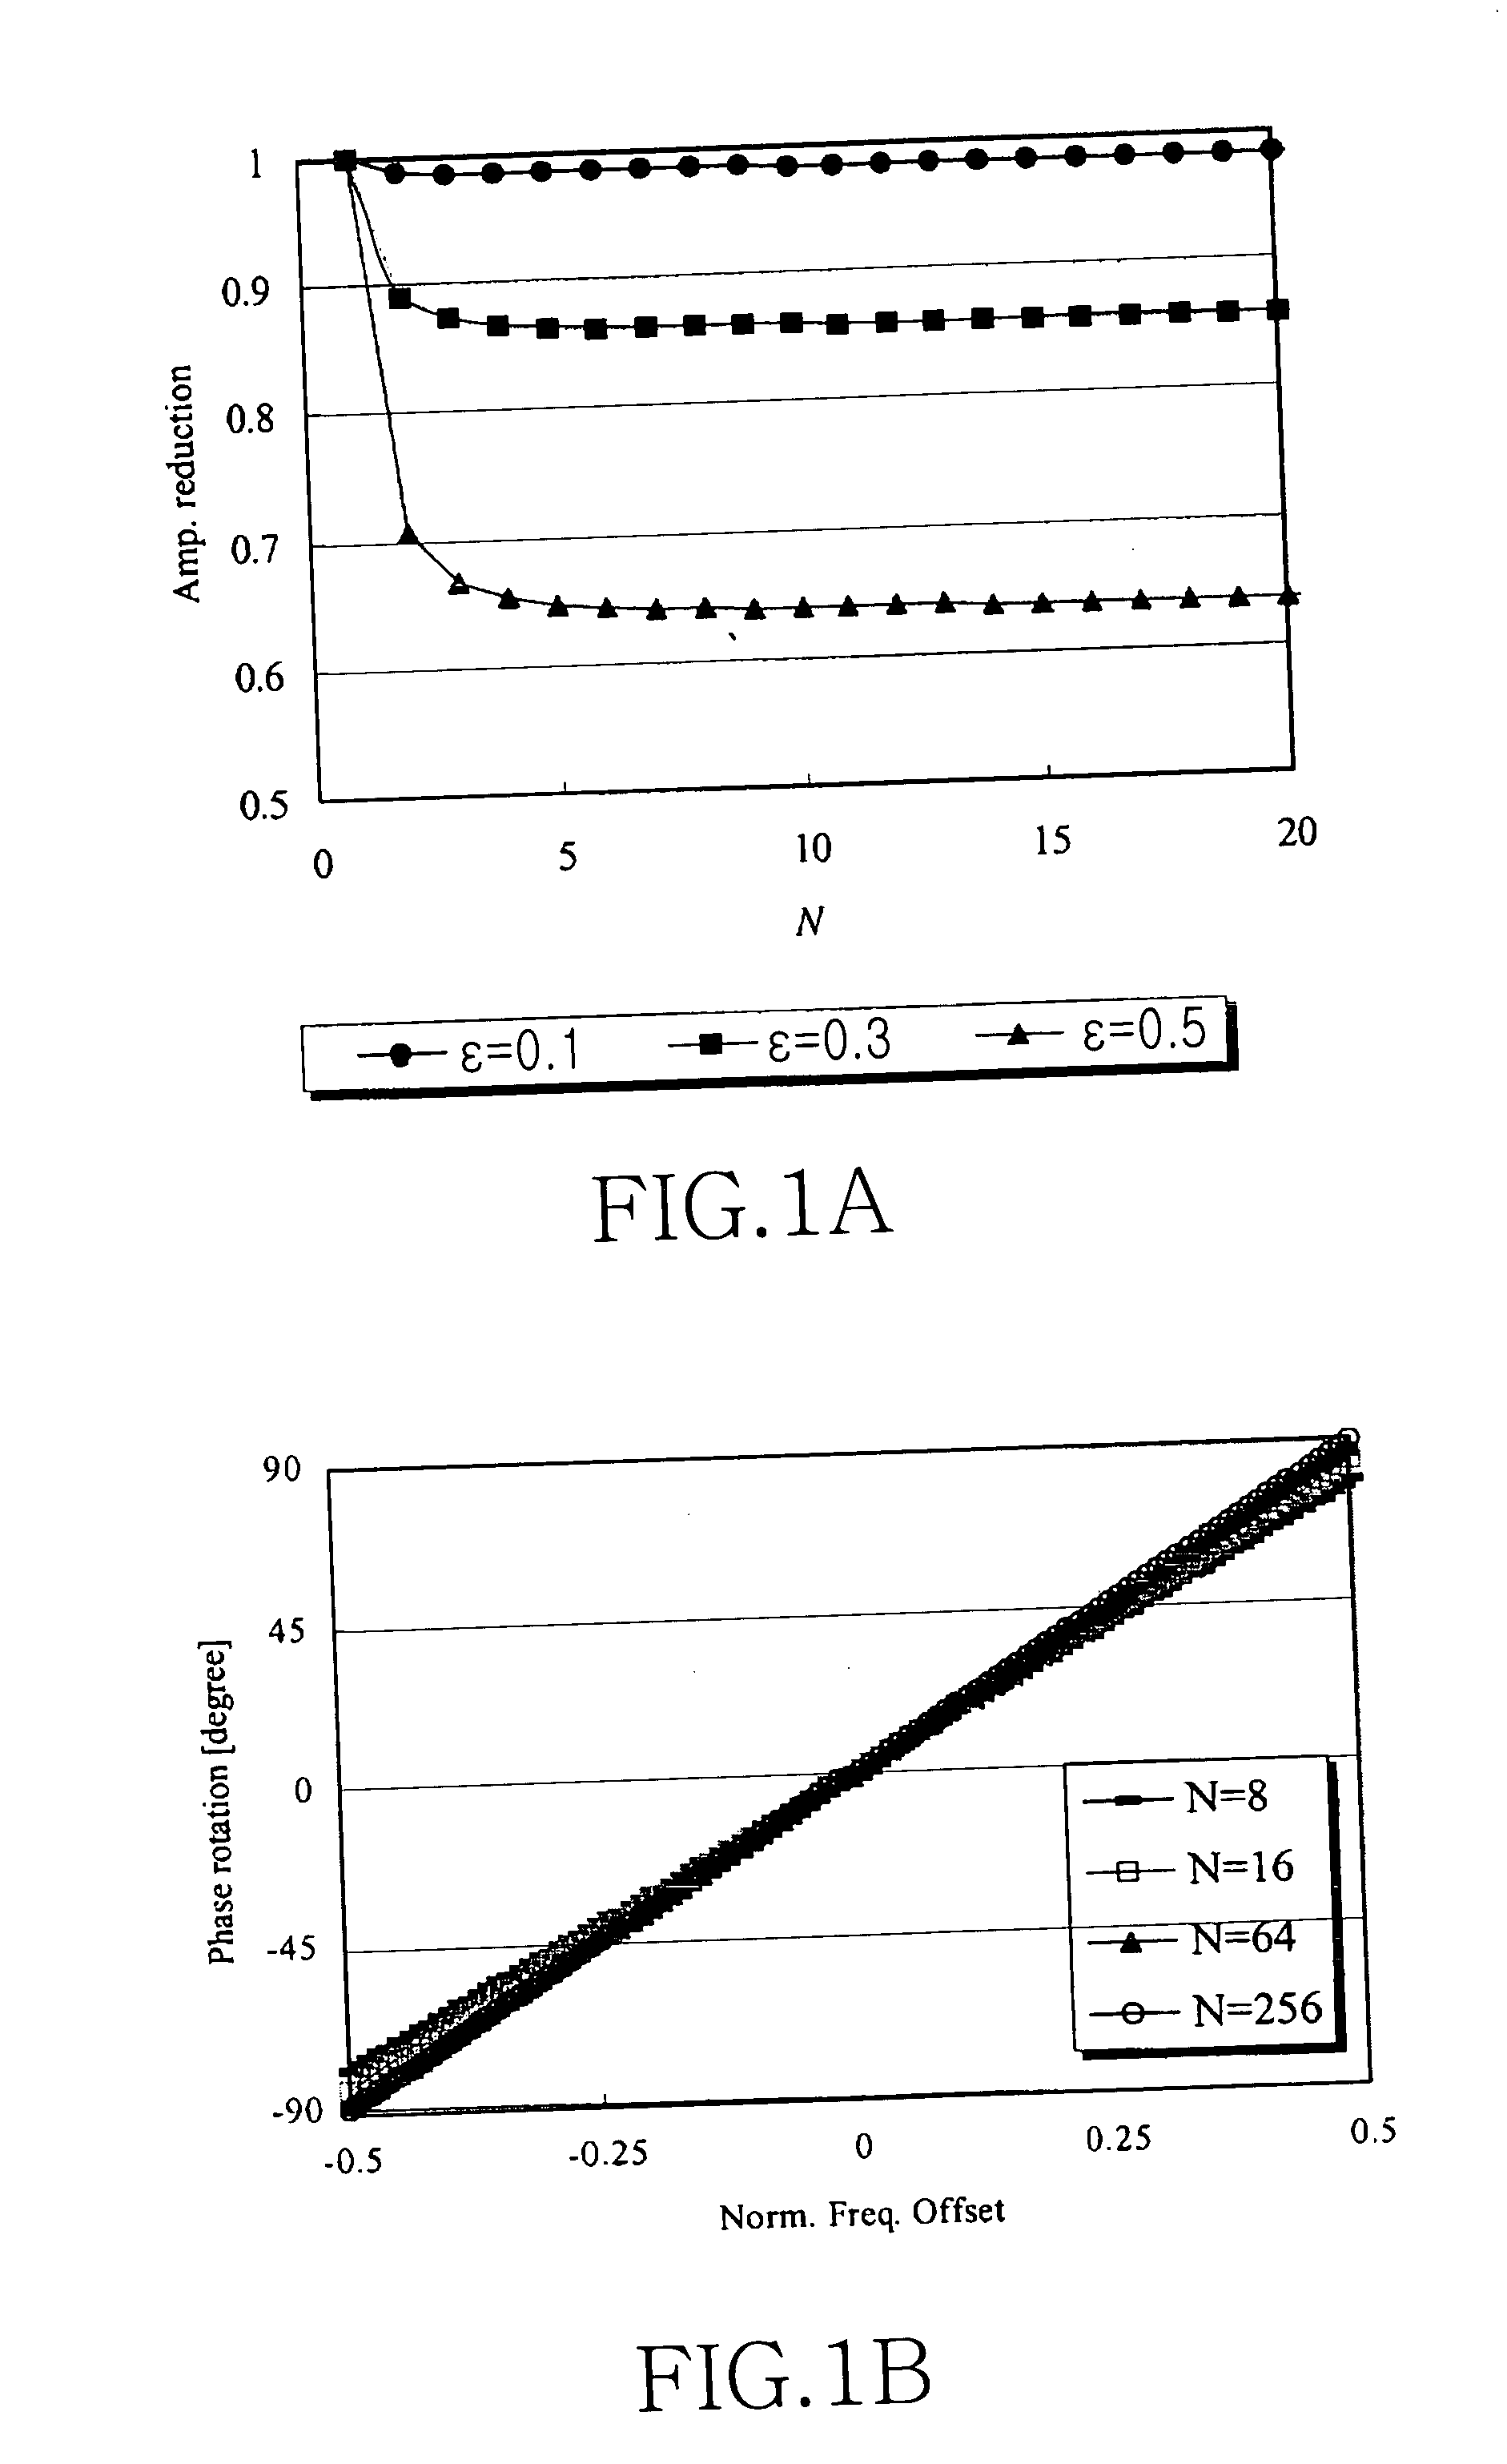 Method and apparatus for compensating for residual frequency offset in an OFDM system